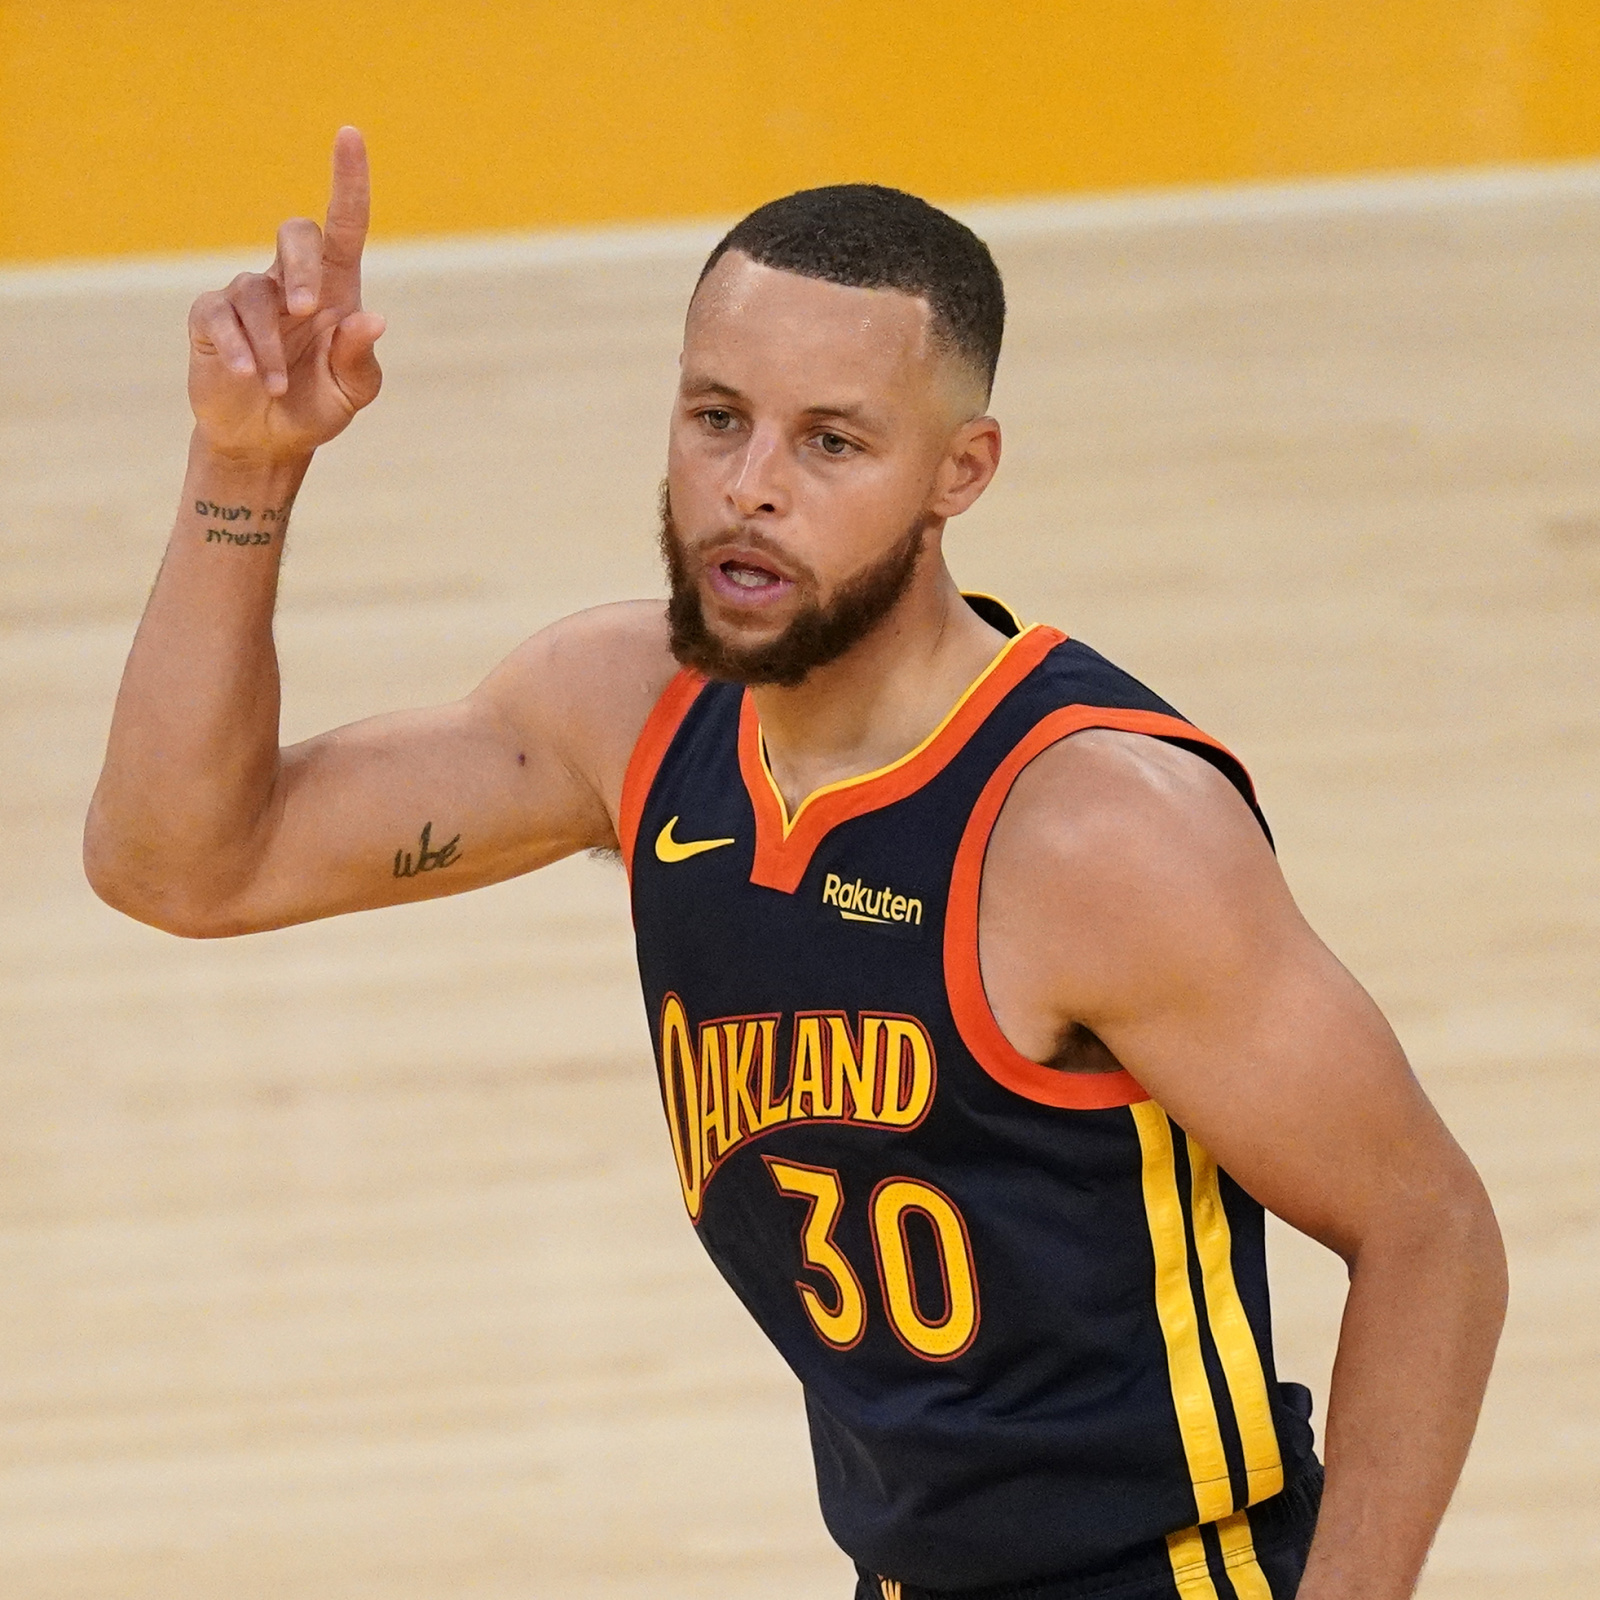 Is Steph Curry in the 2021 Olympics?